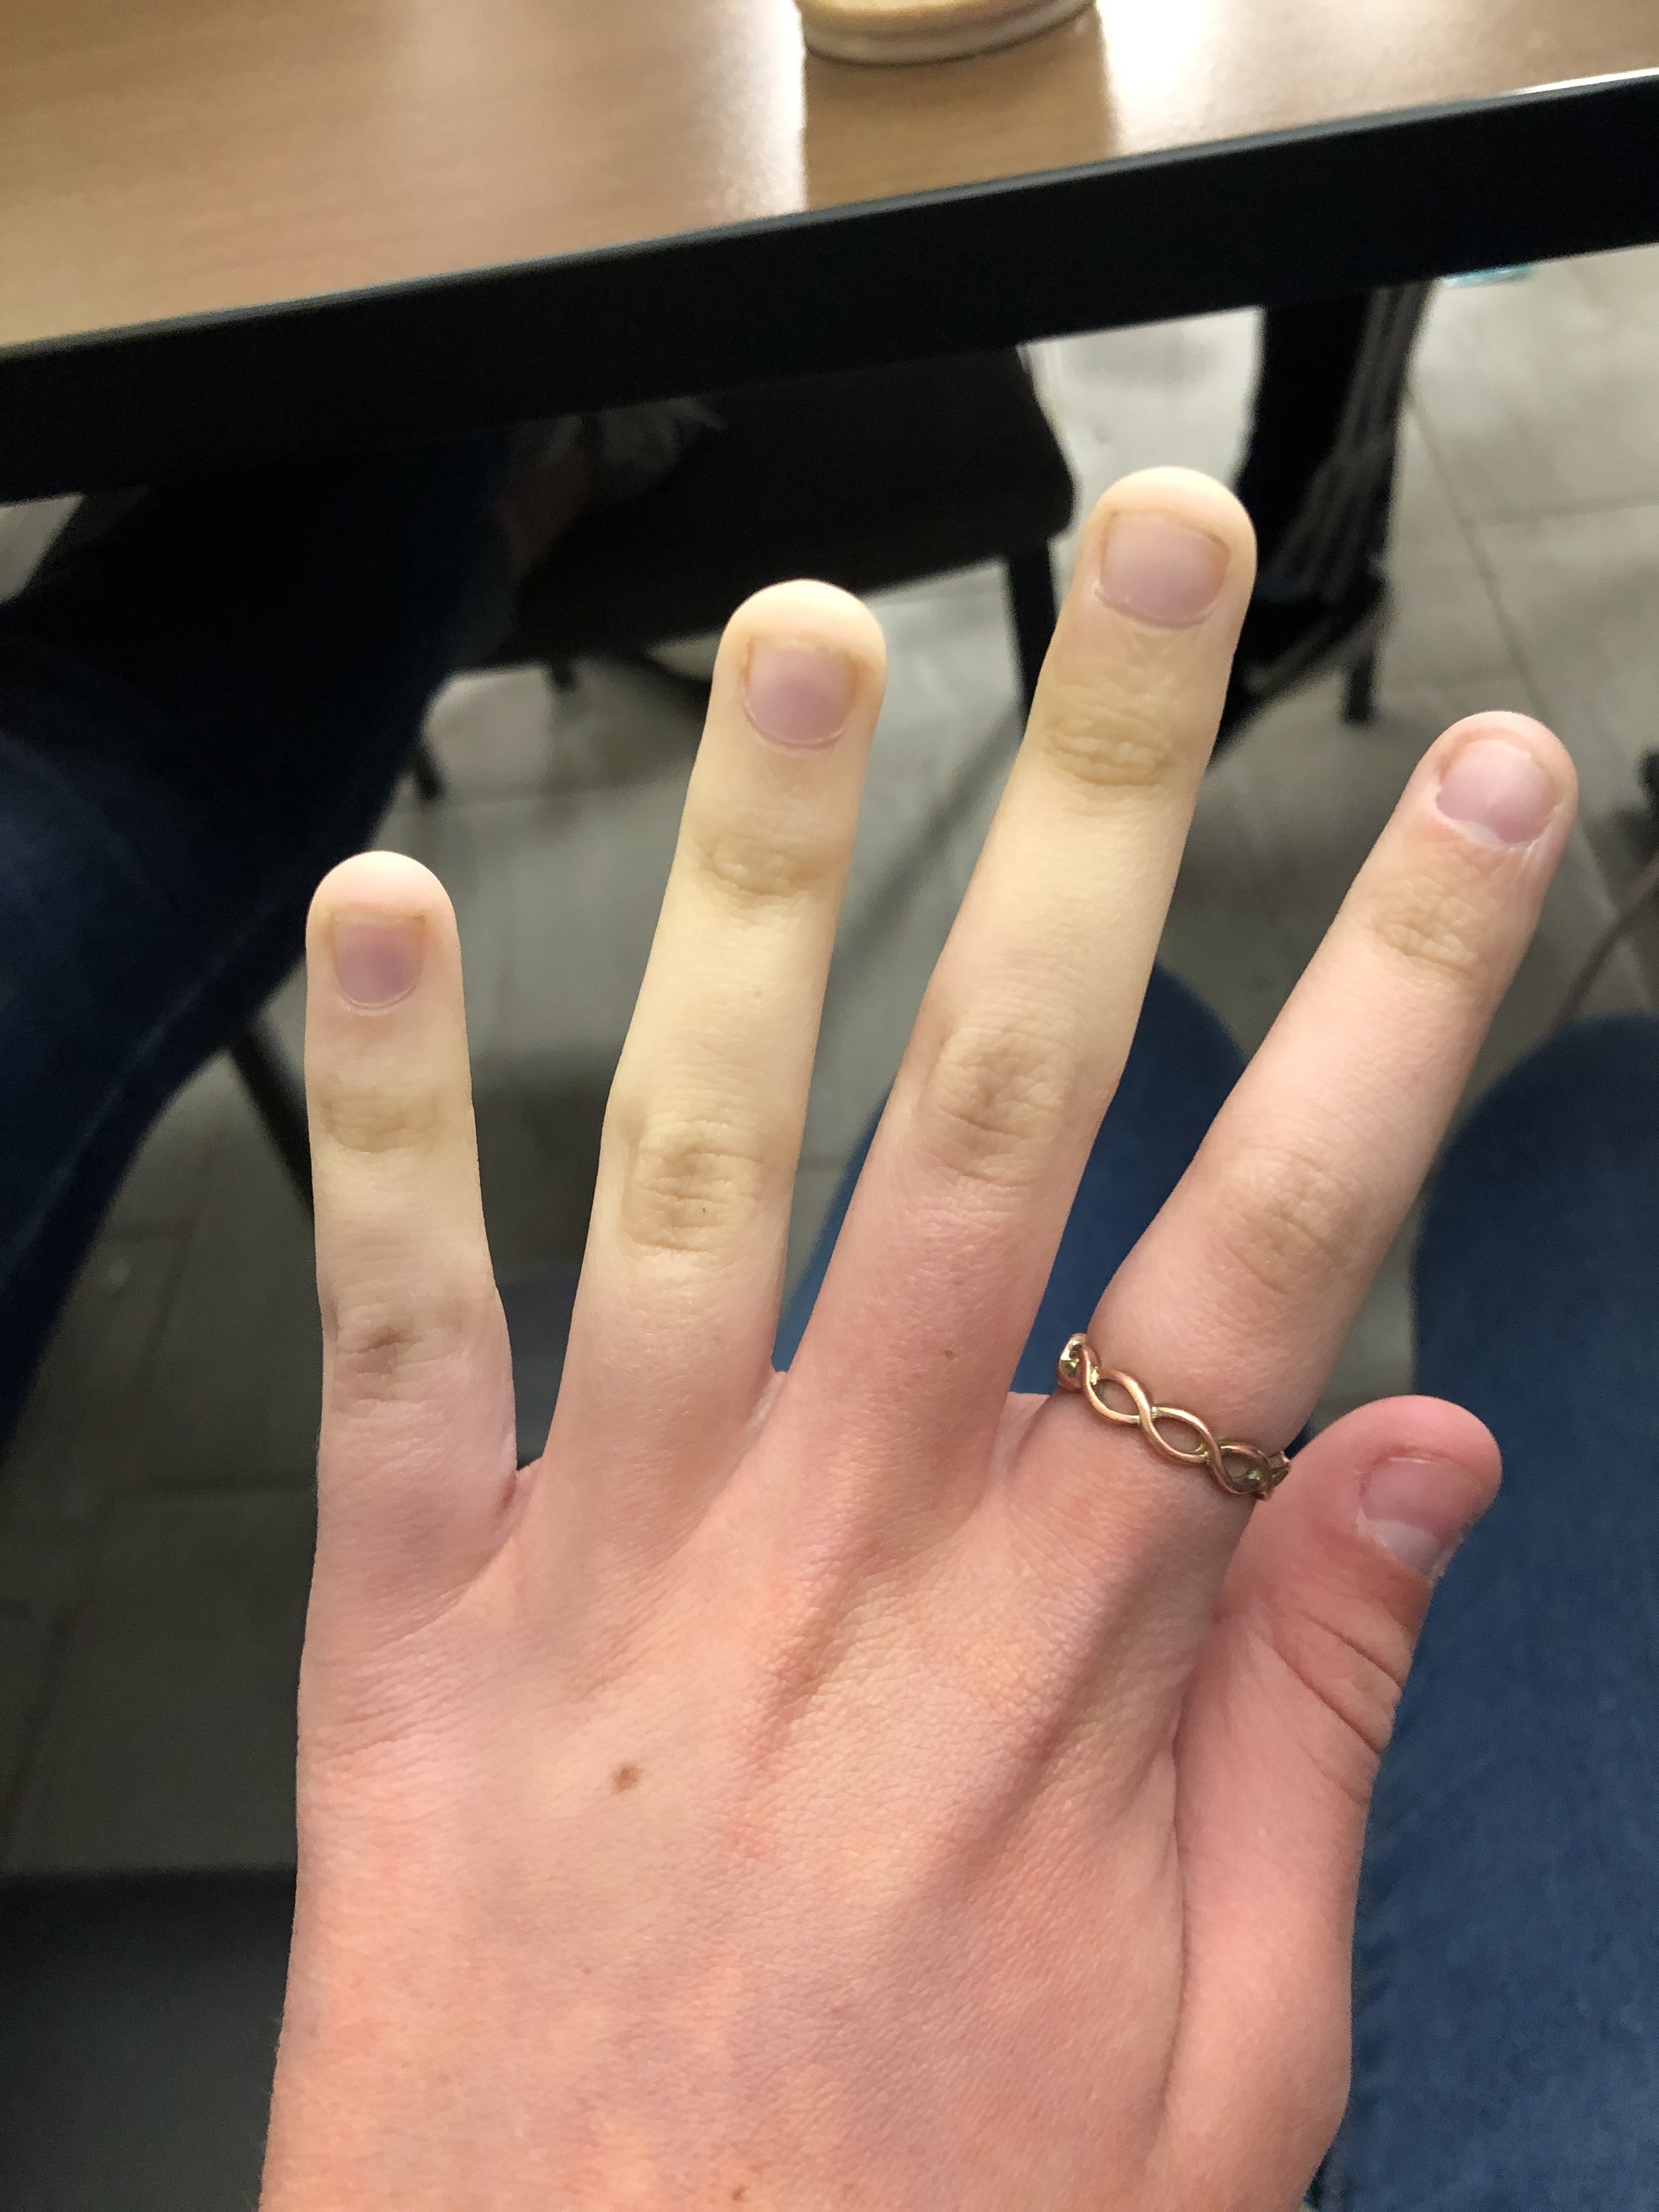 half of the hand is pale